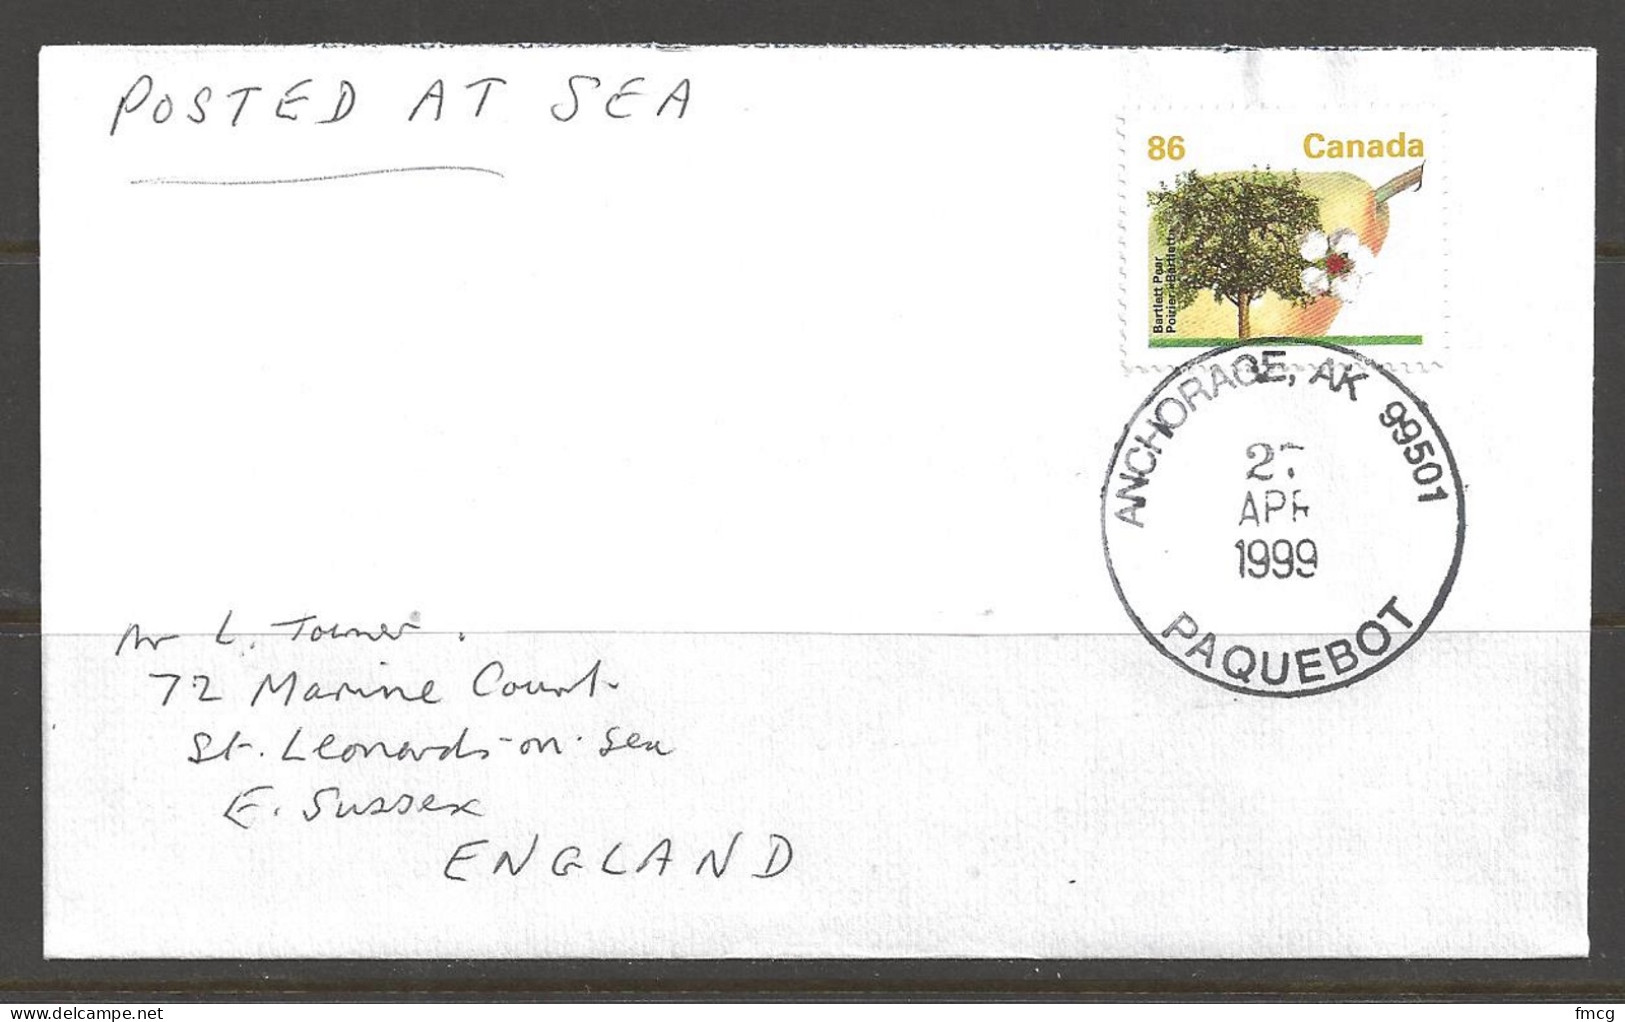 1999 Paquebot Cover Canada Stamp Used In Anchorage, Alaska (27 APR) - Covers & Documents